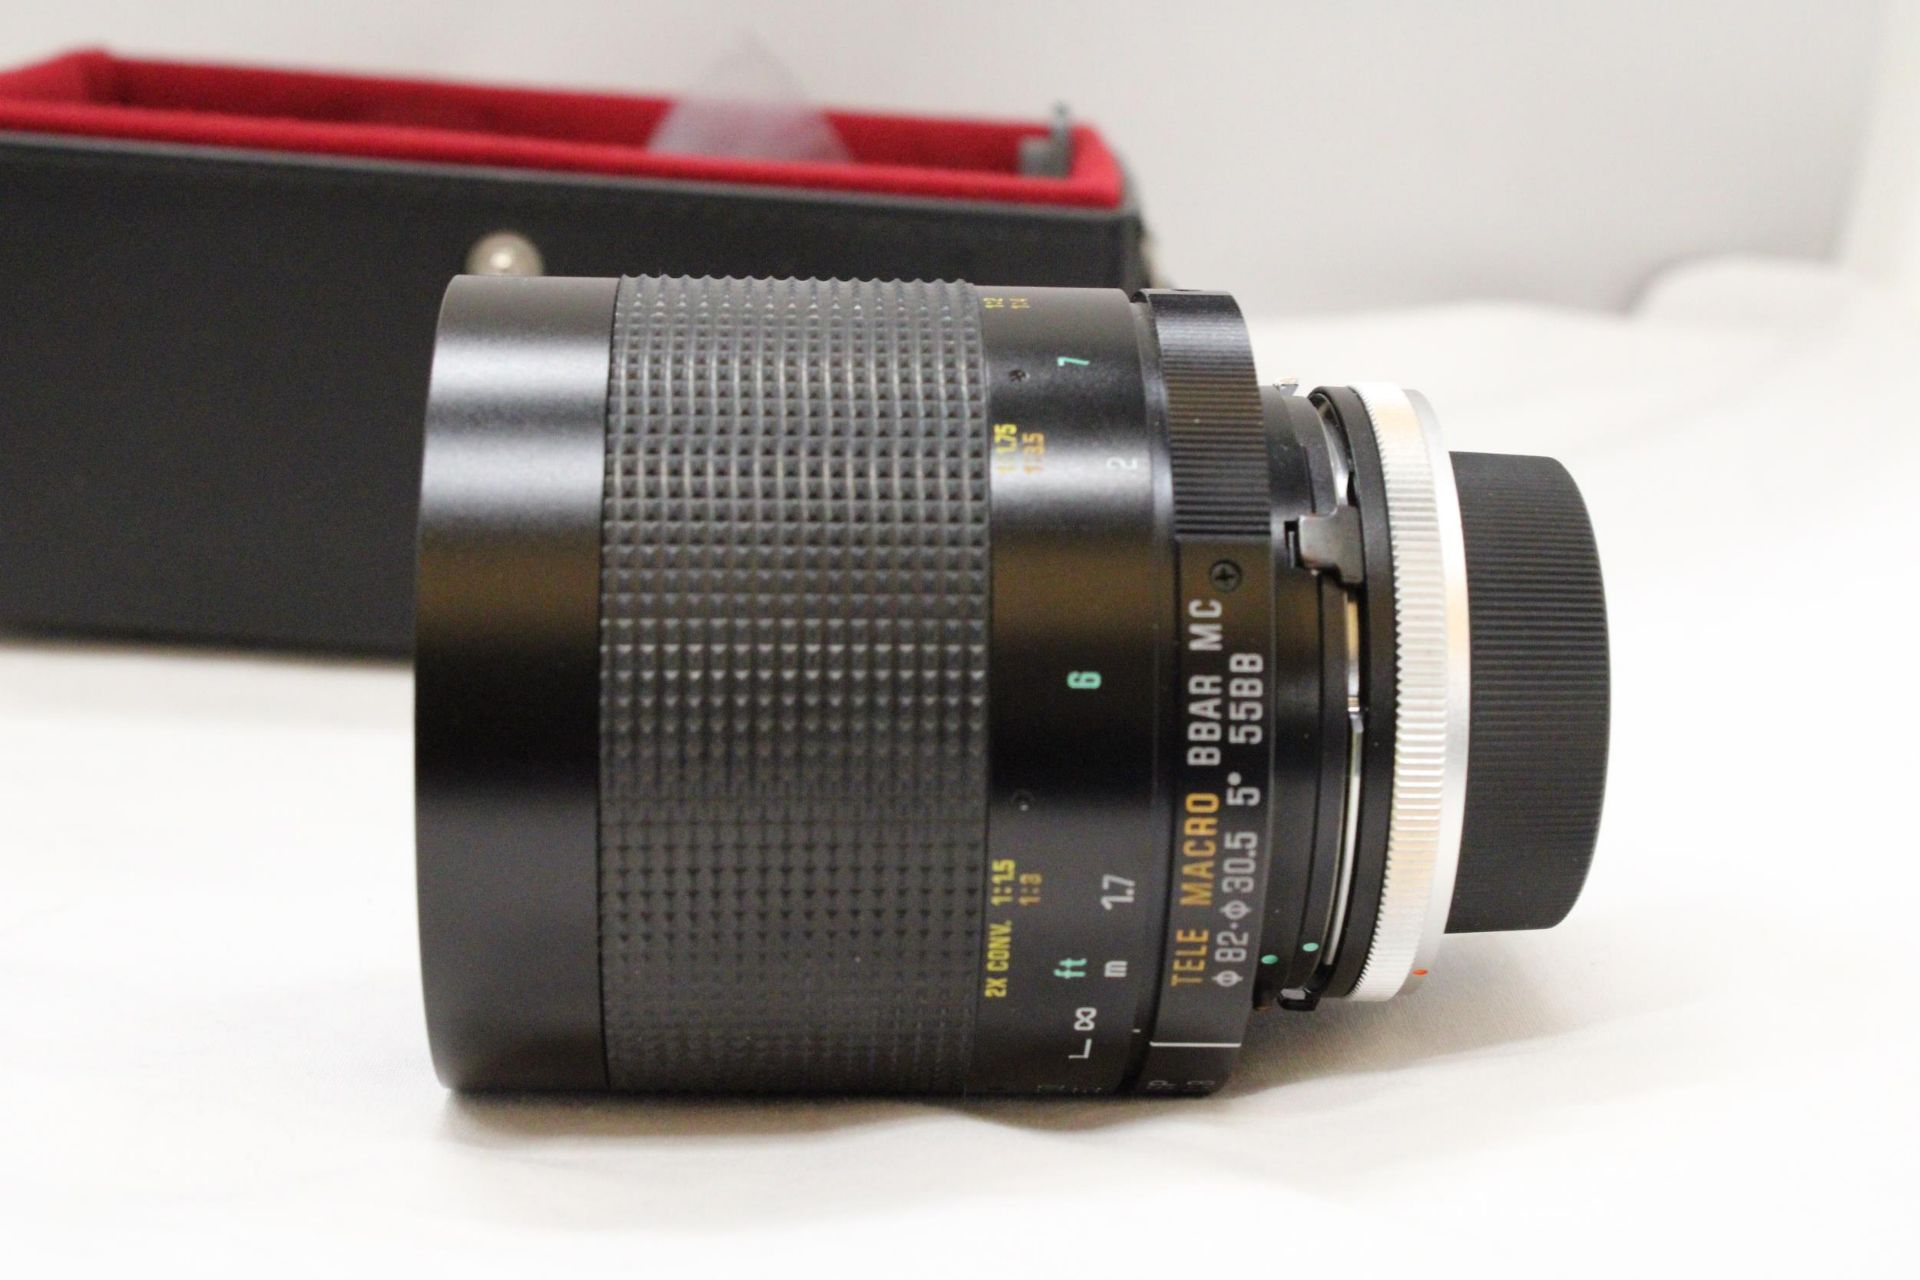 A TAMRON SP 500MM F/8 CAMERA LENS, IN CASE - Image 4 of 6